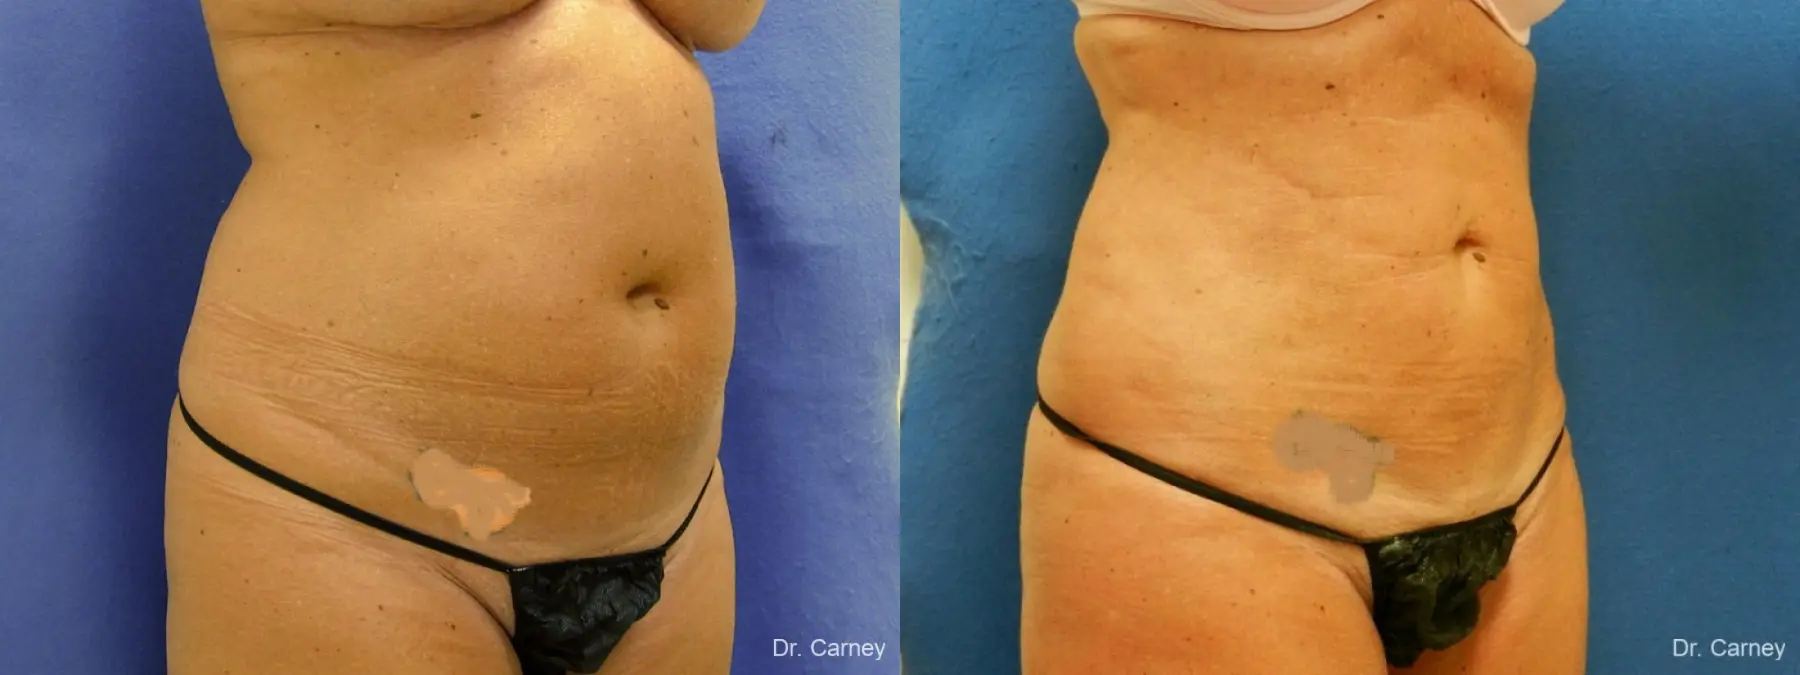 Virginia Beach Liposuction 1279 - Before and After